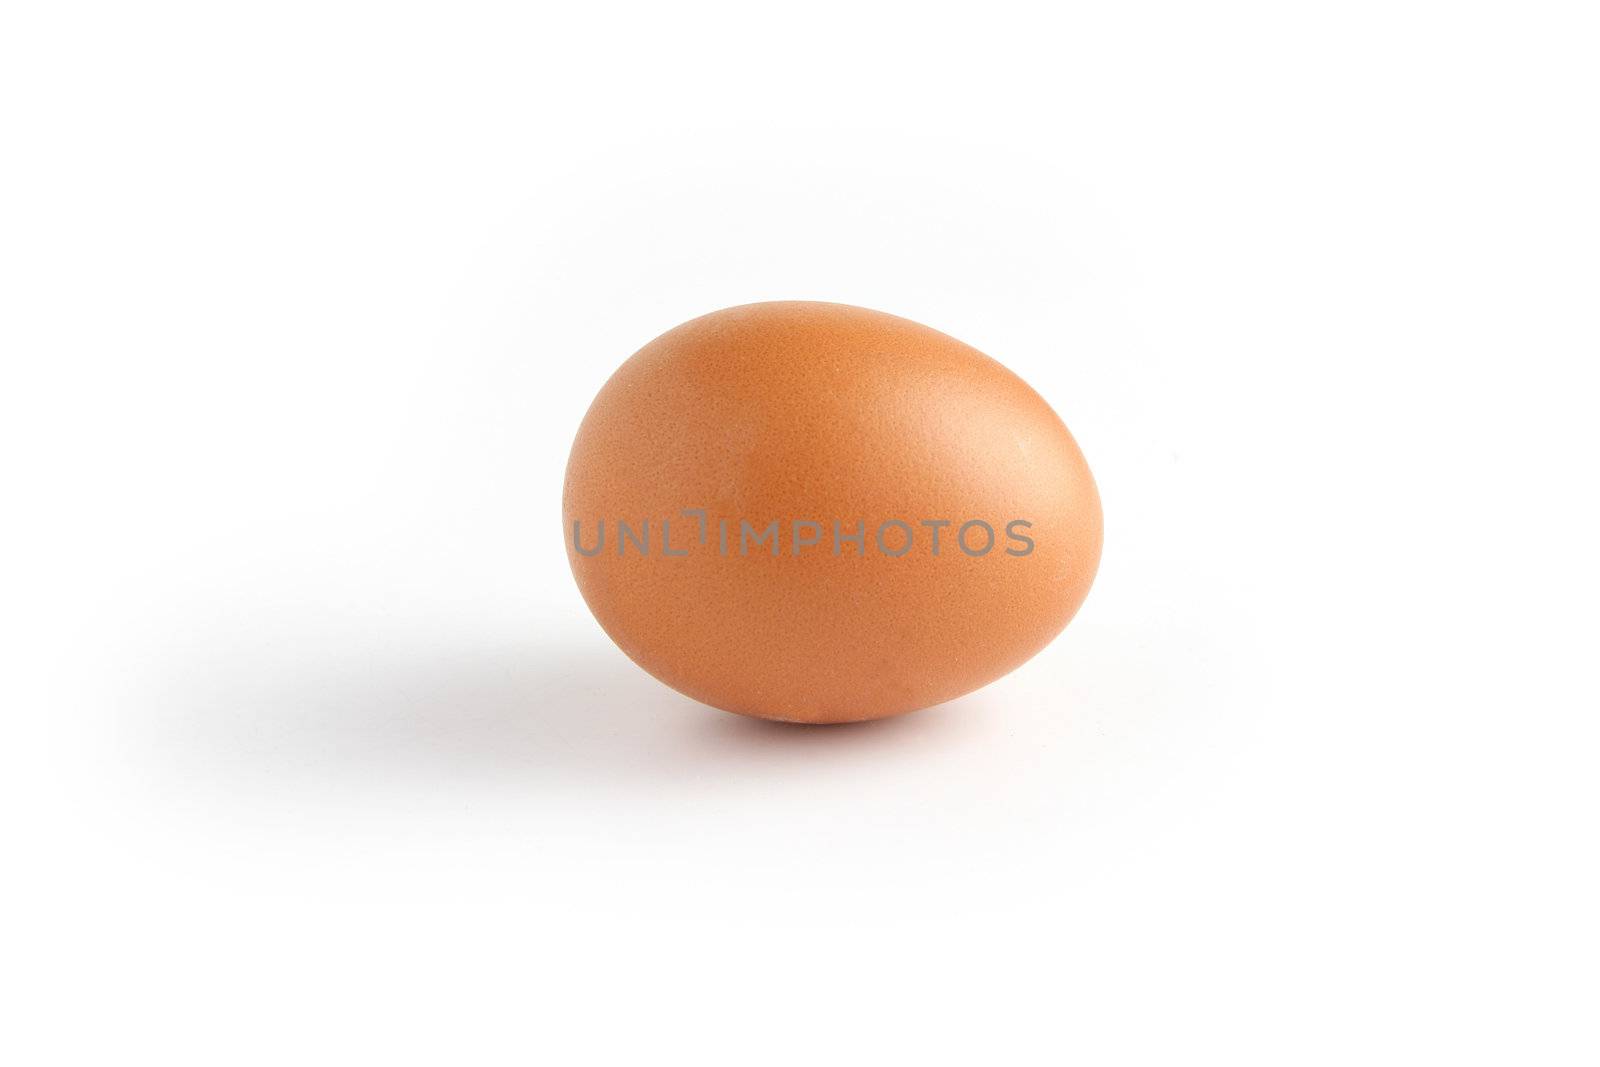 Single egg on white background by phovoir